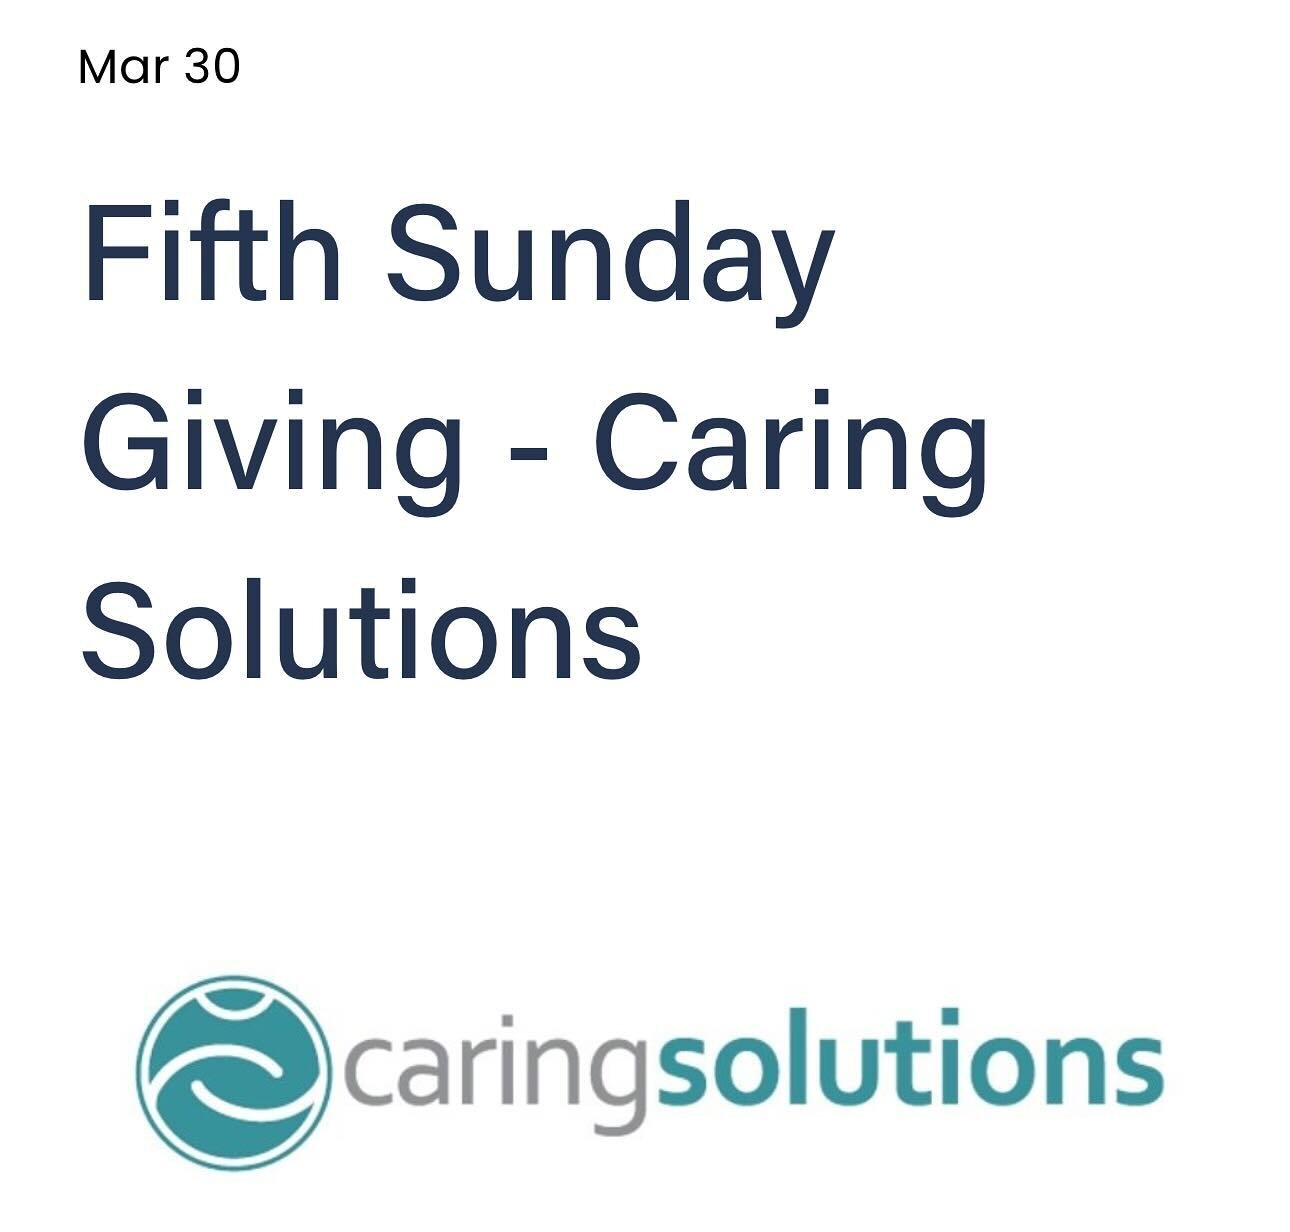 Check out our latest blog post on the work the Lord is doing through Caring Solutions!
&bull;
&ldquo;the goal of Caring Solutions is to insert Jesus into the lives of these women in any way they can. Jesus is the One who makes the difference in the s